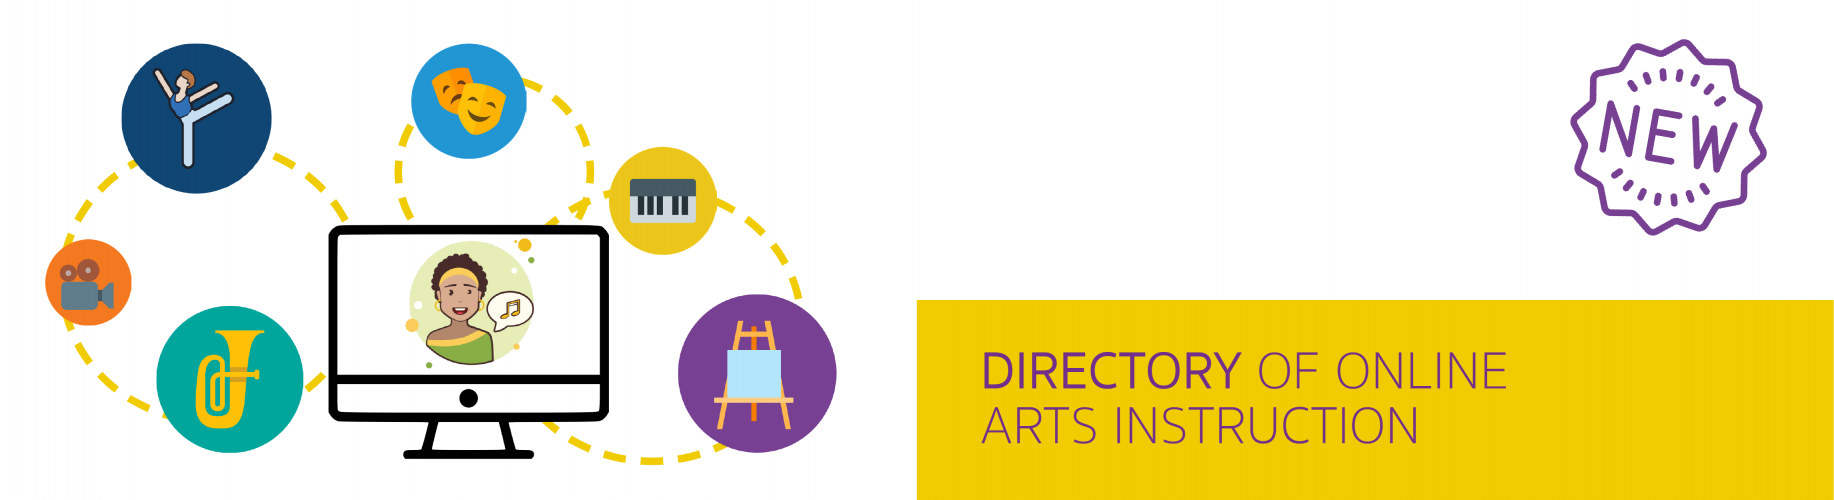 Directory of Online Arts Instruction